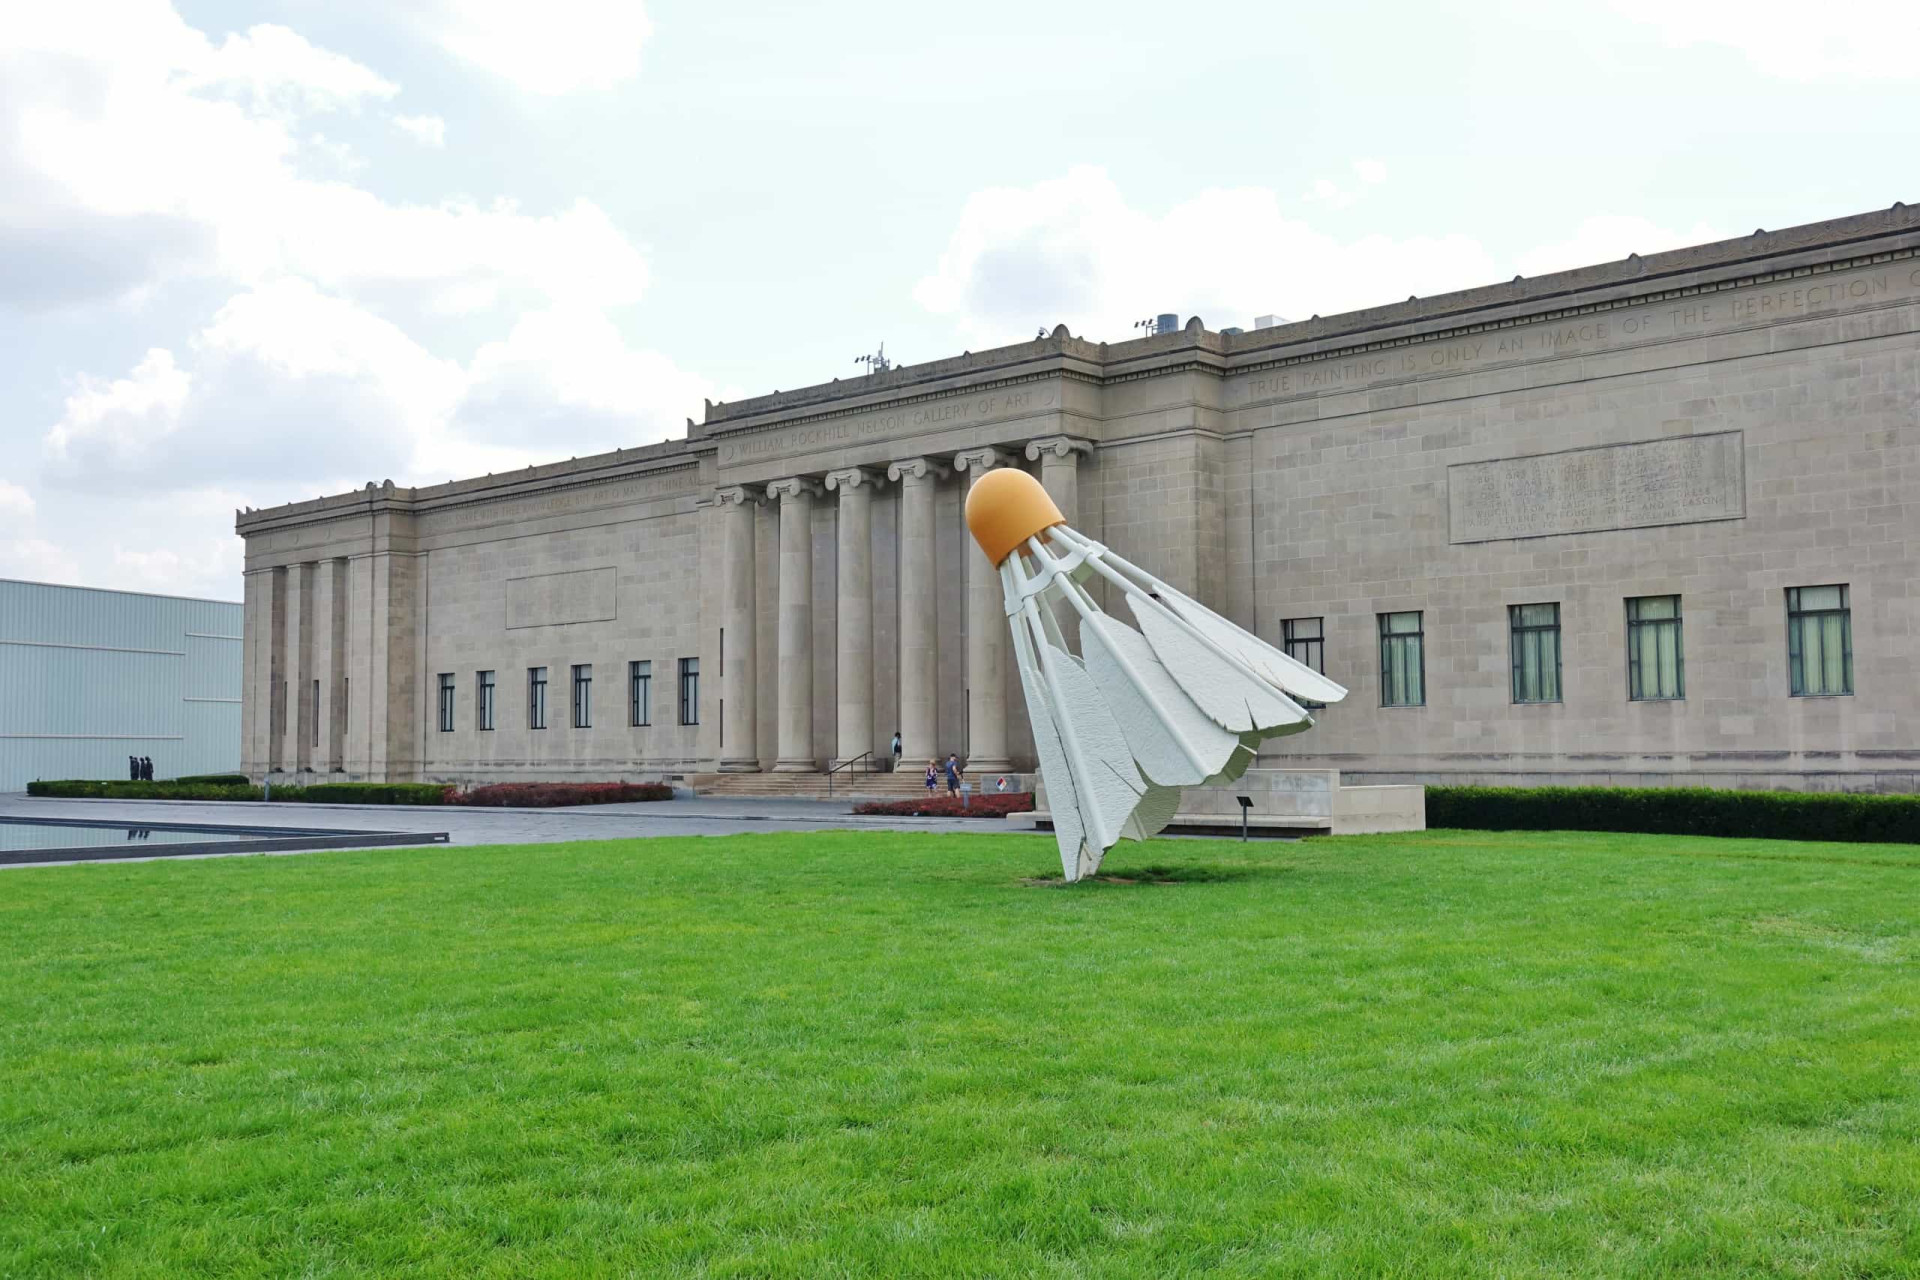 <p>Besides an extensive collection of Asian art, the Nelson-Atkins Museum of Art is celebrated for its iconic shuttlecock sculptures—the world's largest—scattered throughout the grounds.</p><p>You may also like:<a href="https://www.starsinsider.com/n/354577?utm_source=msn.com&utm_medium=display&utm_campaign=referral_description&utm_content=198095v22en-en"> Famous artists who have been accused of plagiarism</a></p>